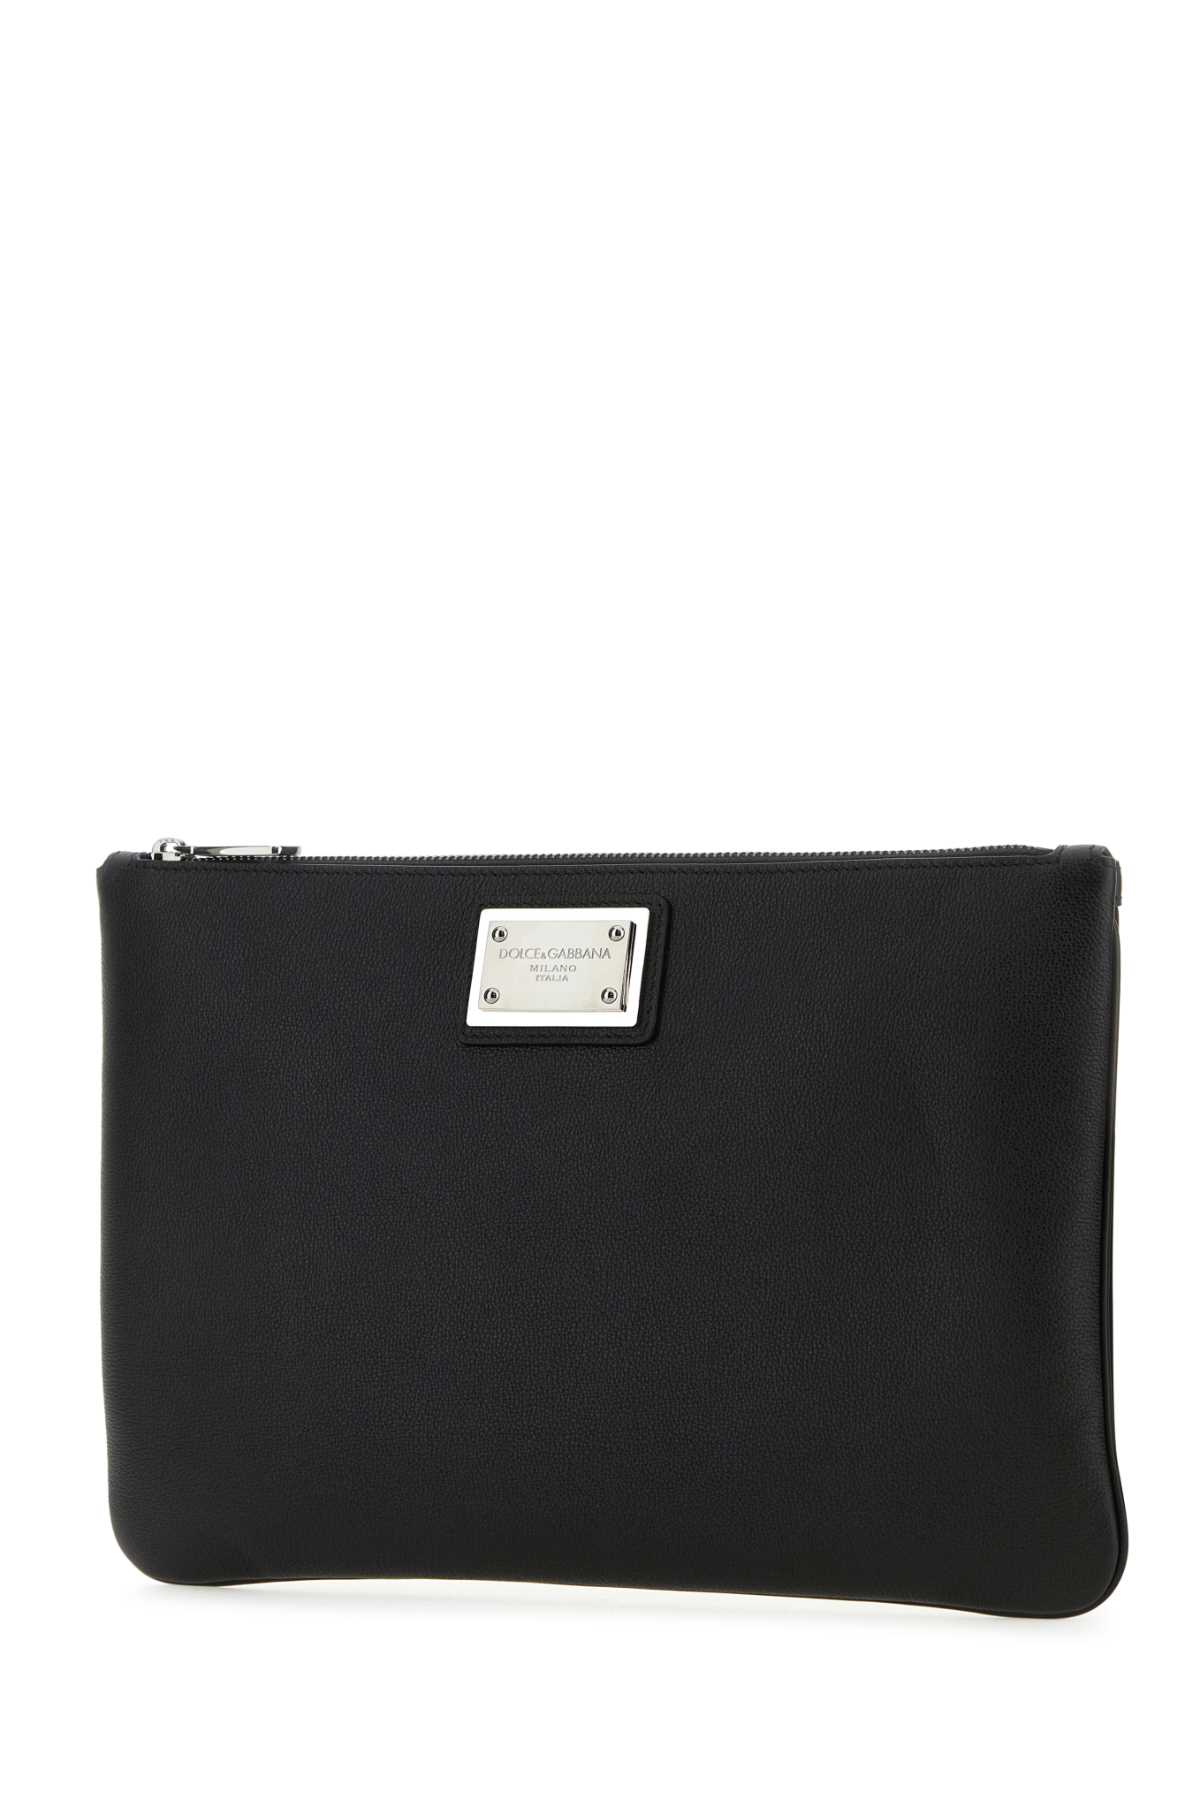 Dolce & Gabbana Black Leather And Nylon Pouch In 8b956